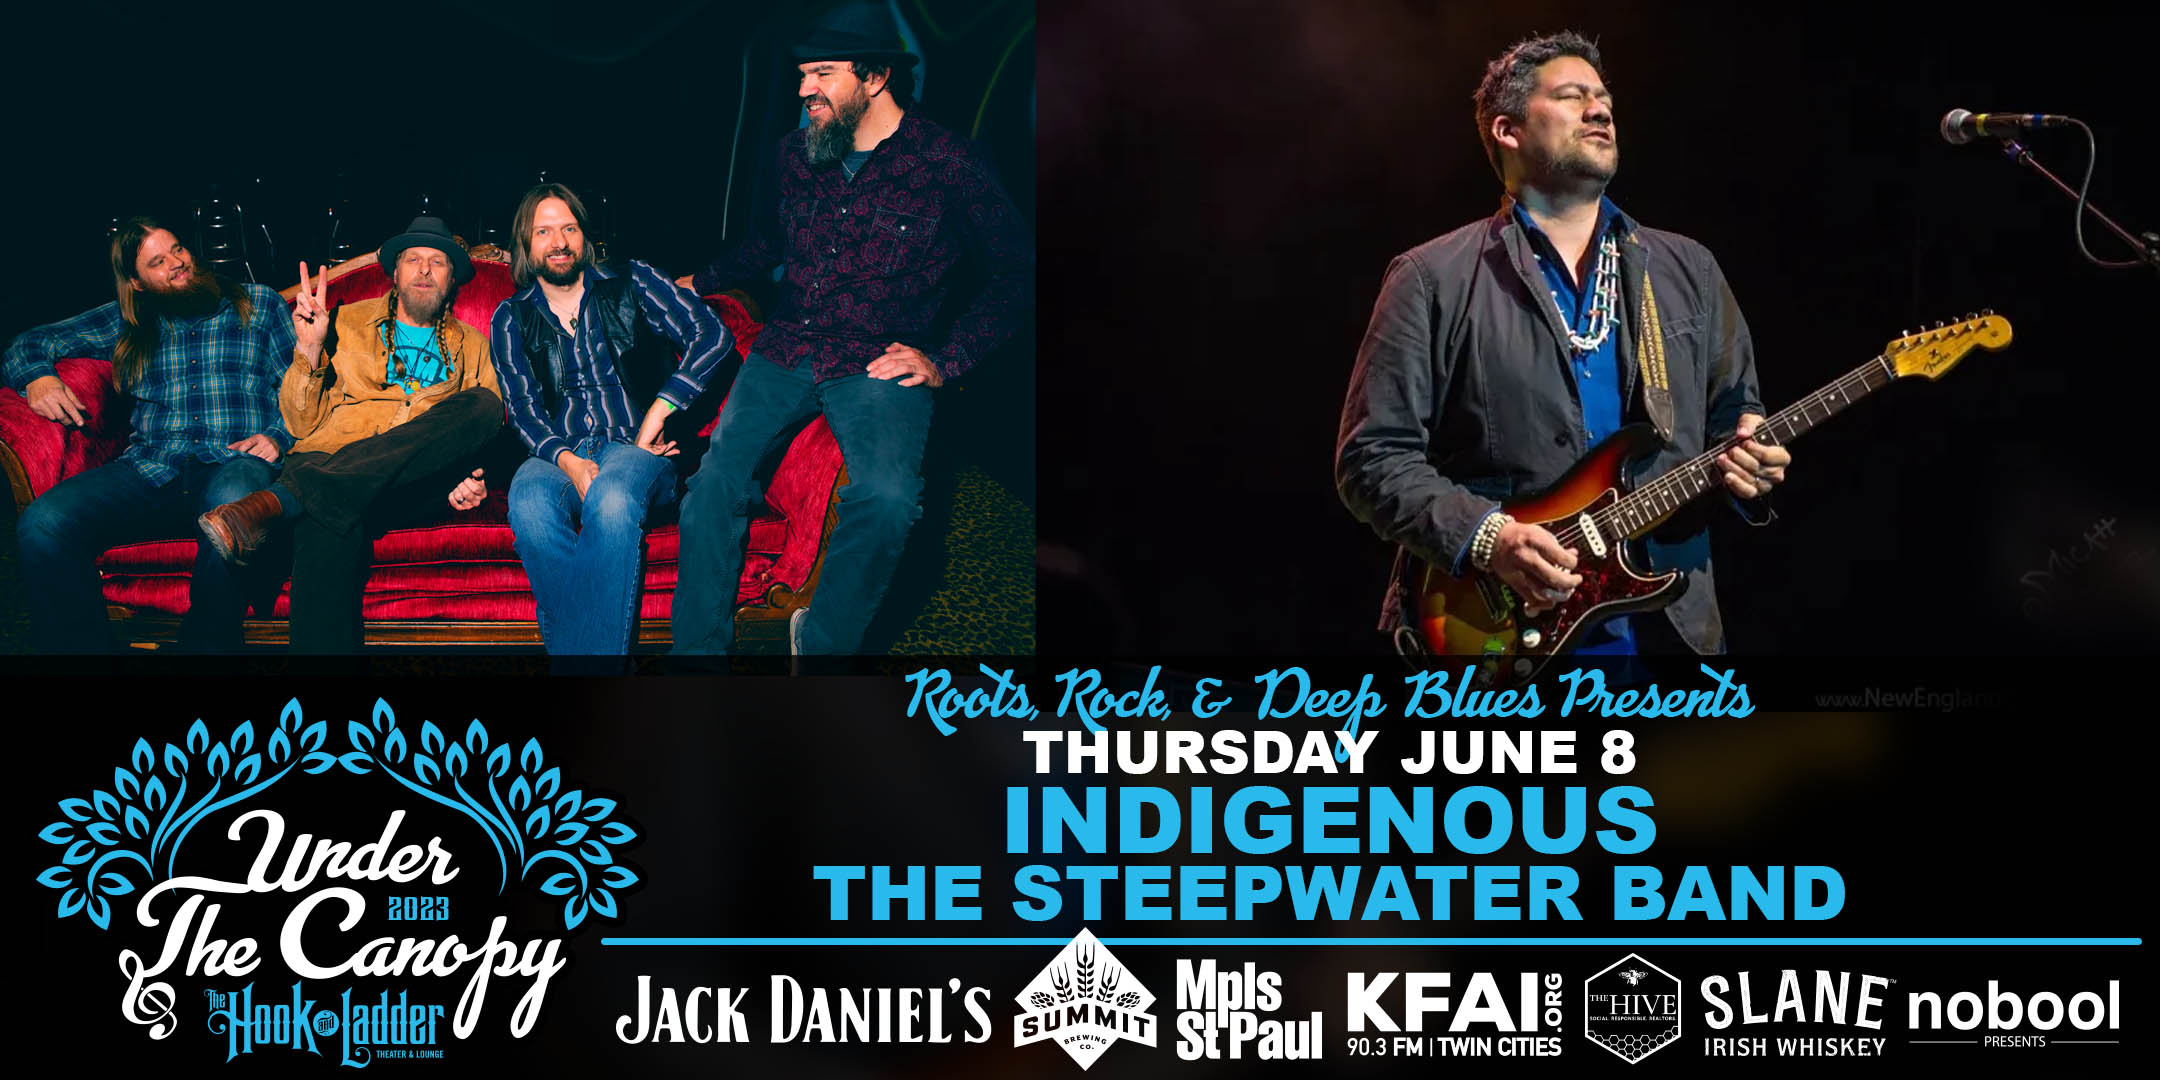 Roots Rock & Deep Blues & MN Blues Society Presents Indigenous / The Steepwater Band Thursday, June 8, 2023 Under The Canopy at The Hook and Ladder Theater "An Urban Outdoor Summer Concert Series" Doors 6:00pm :: Music 7:00pm :: 21+ Reserved Seats: $35 GA: $20 ADV / $25 DOS * Does Not Include Fees